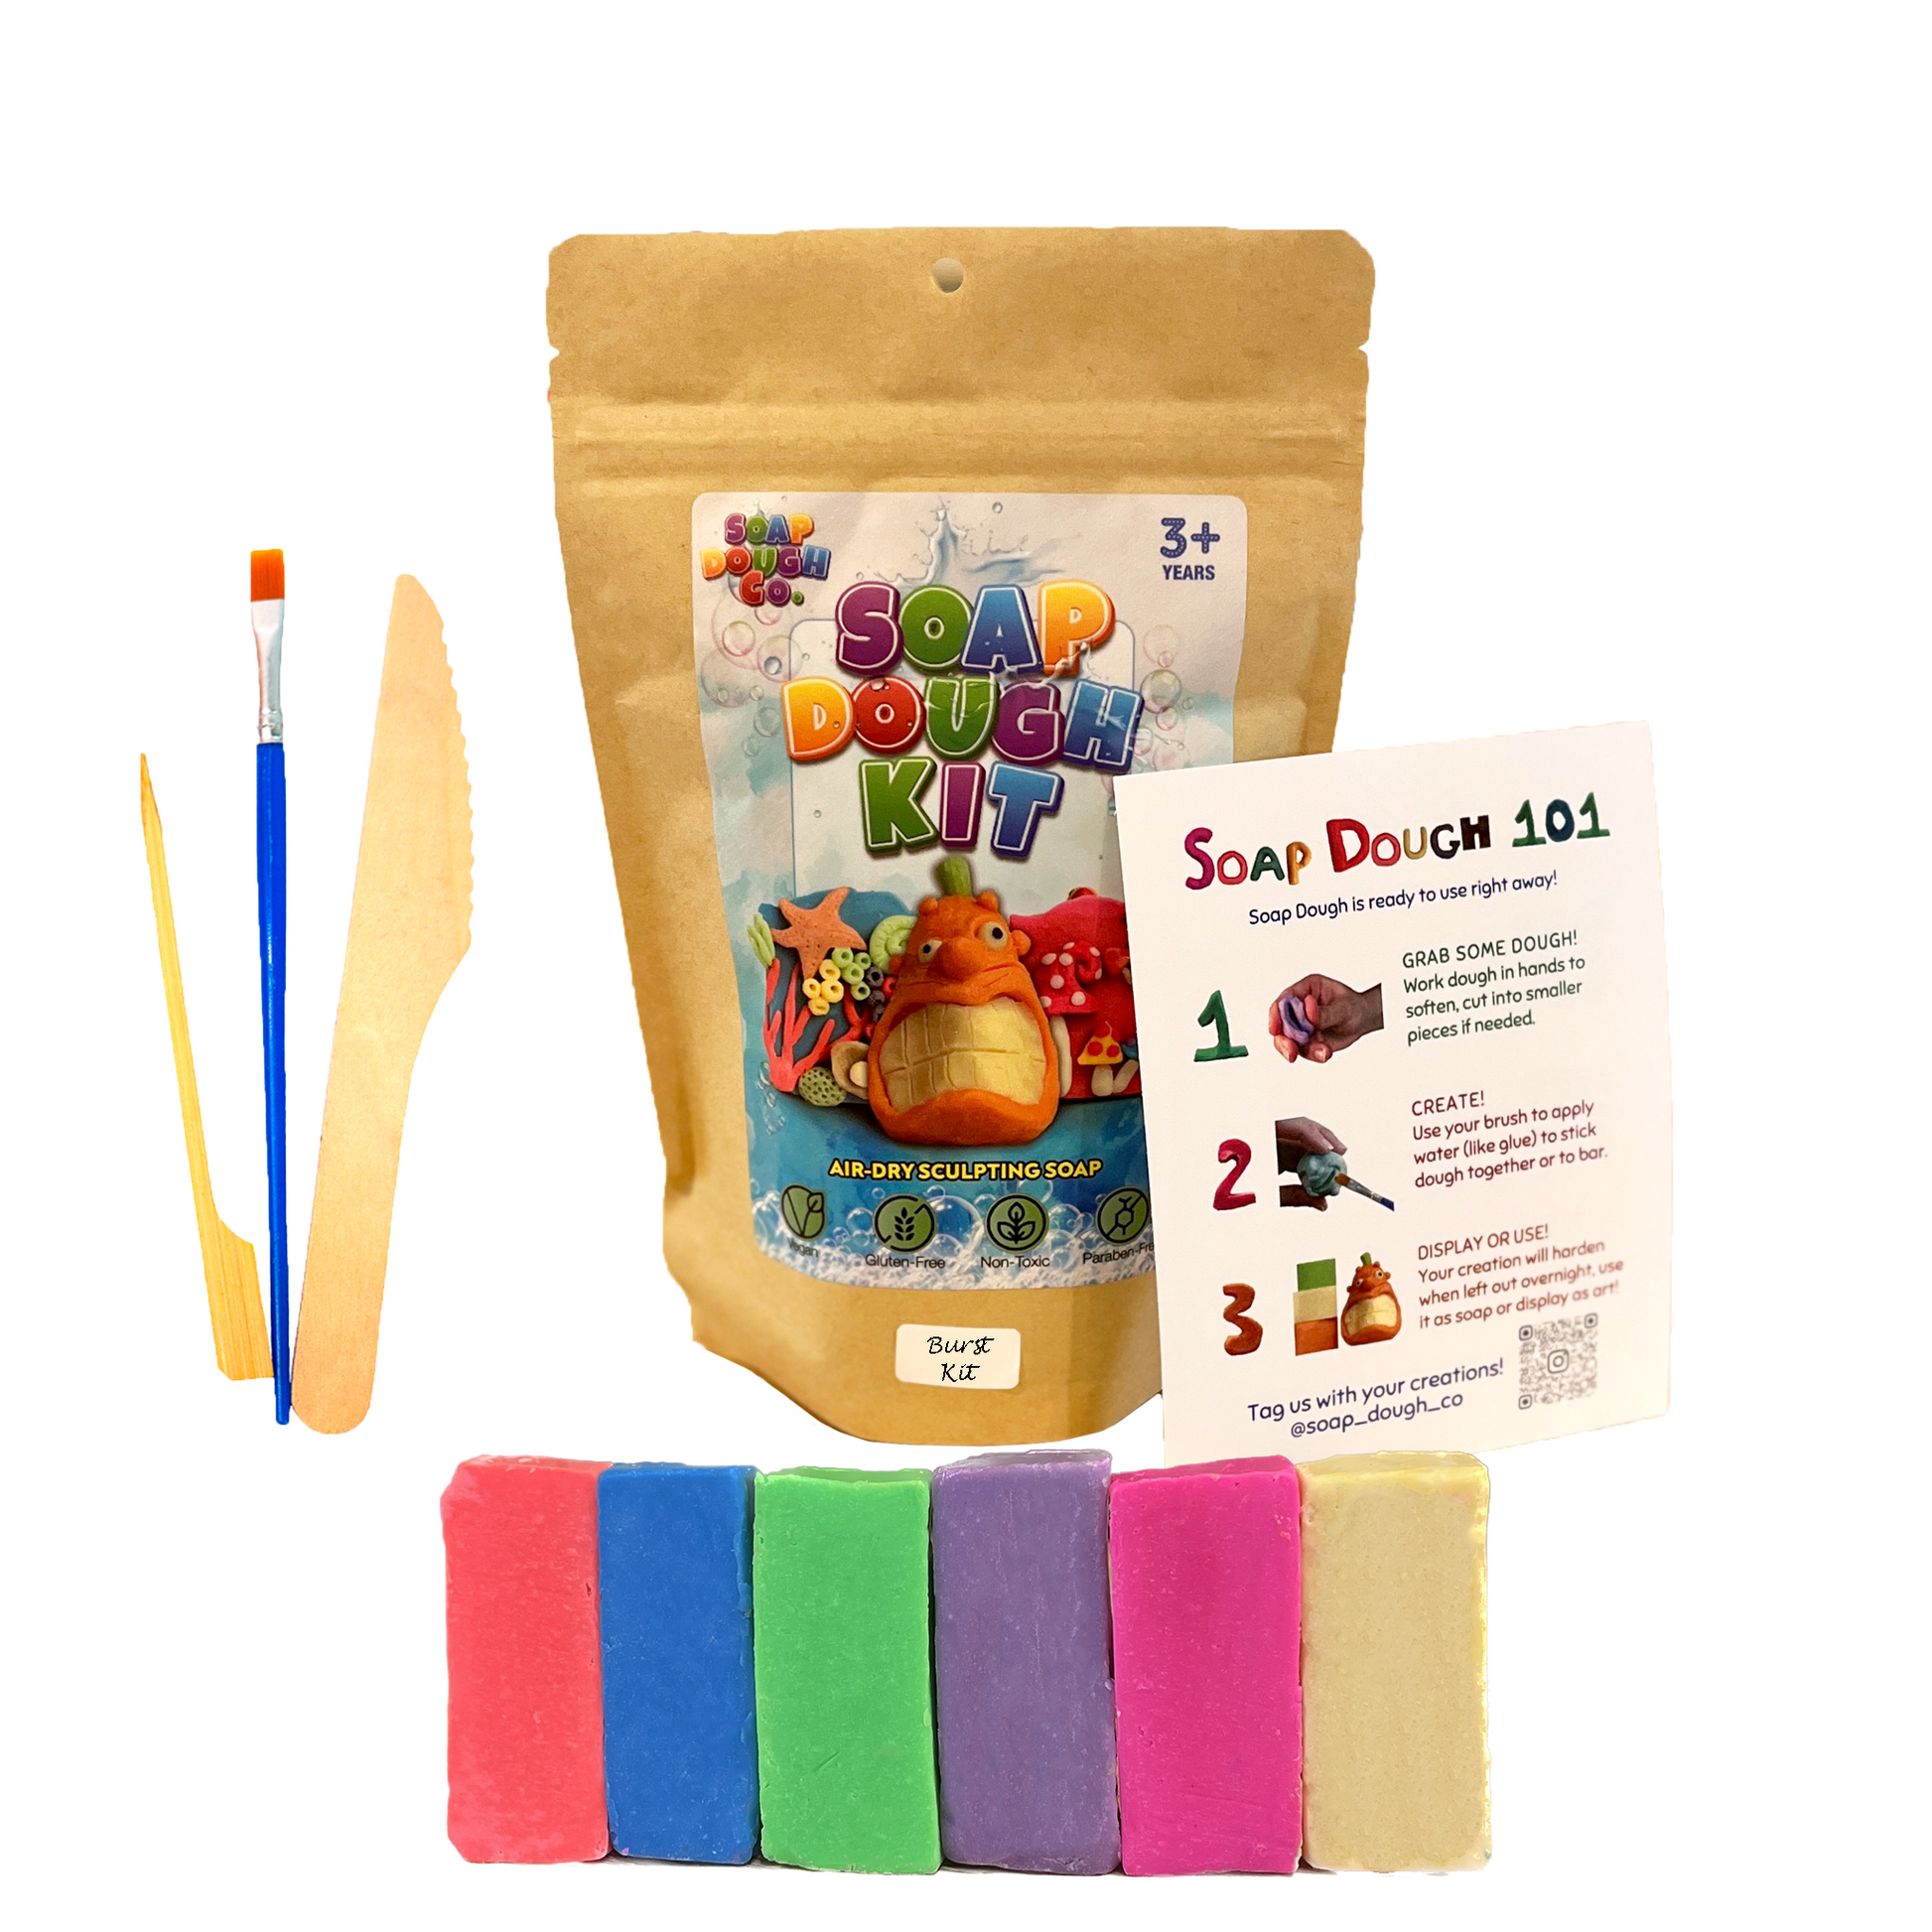 Soap Dough Co. - Burst Kit - Wall of purple, neon orange, yellow, blue, neon pink, and green with eco-bag, tools, and instructions